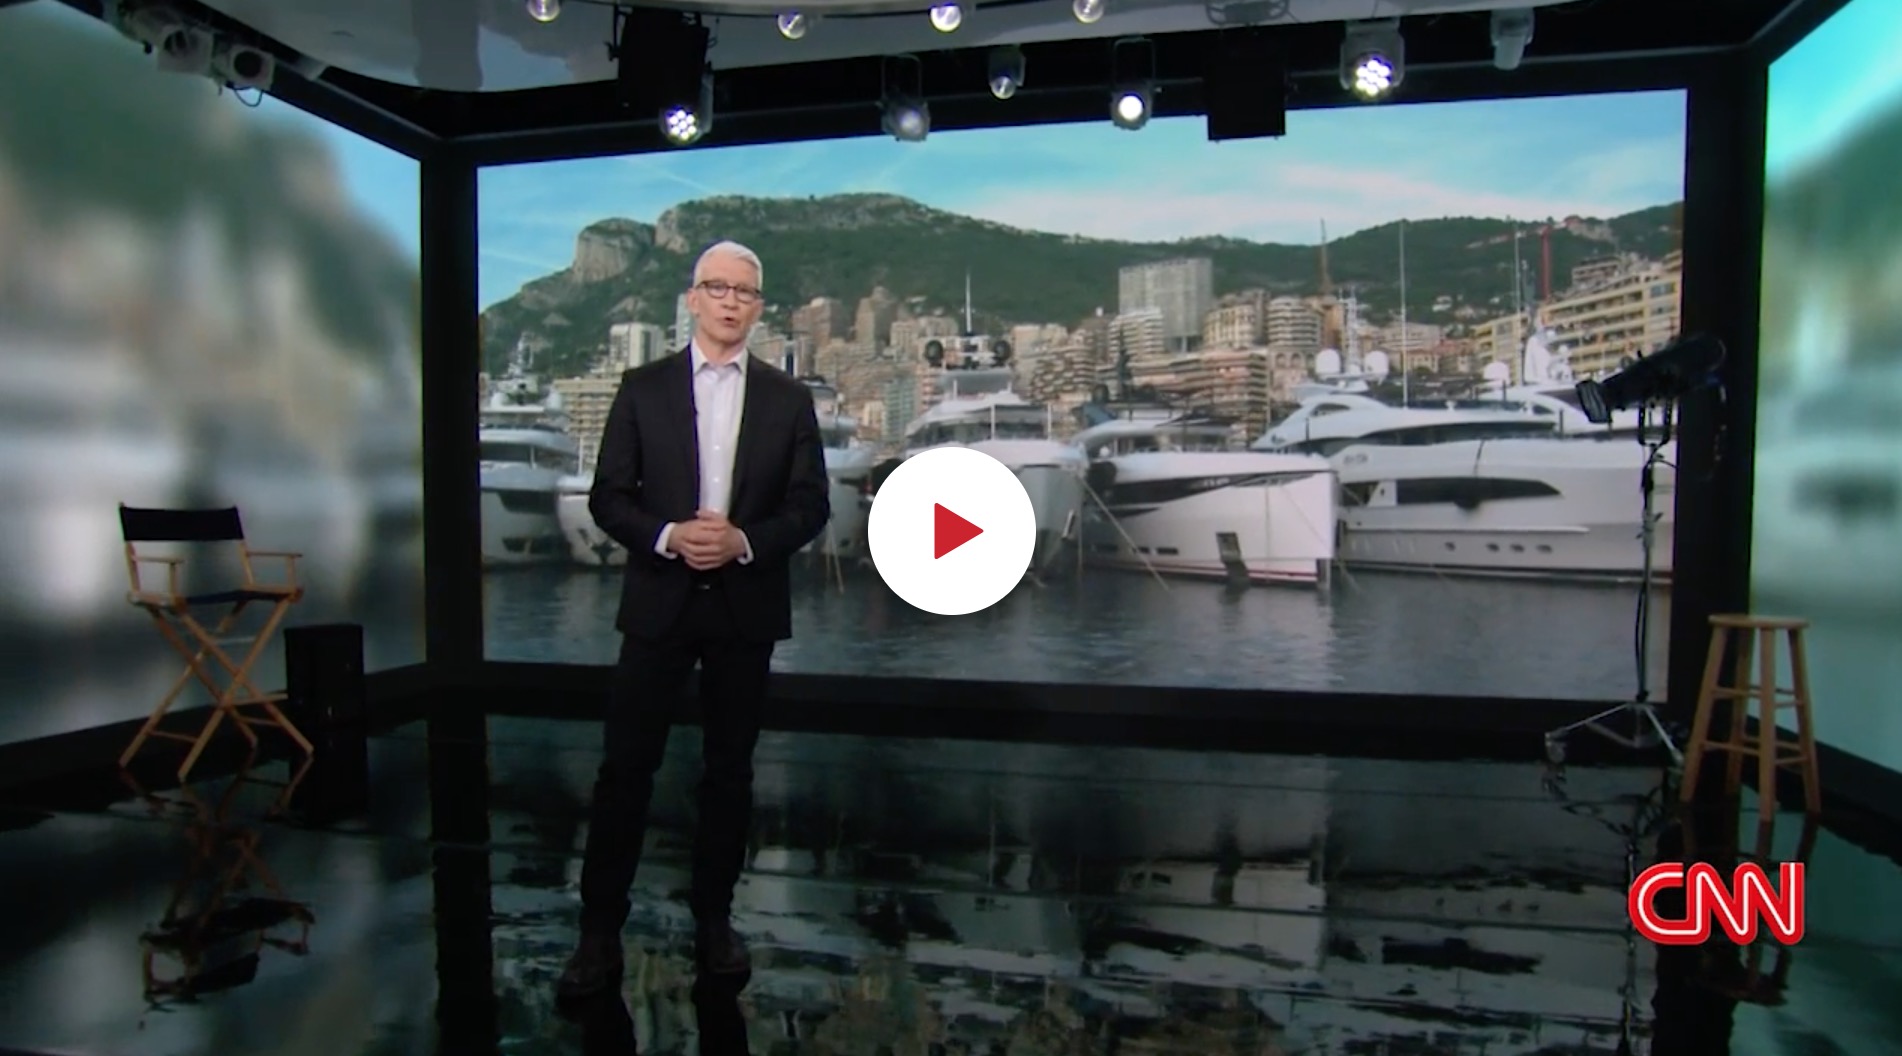 CNN THE WHOLE STORY with Anderson Cooper – Superyachts & The Superrich